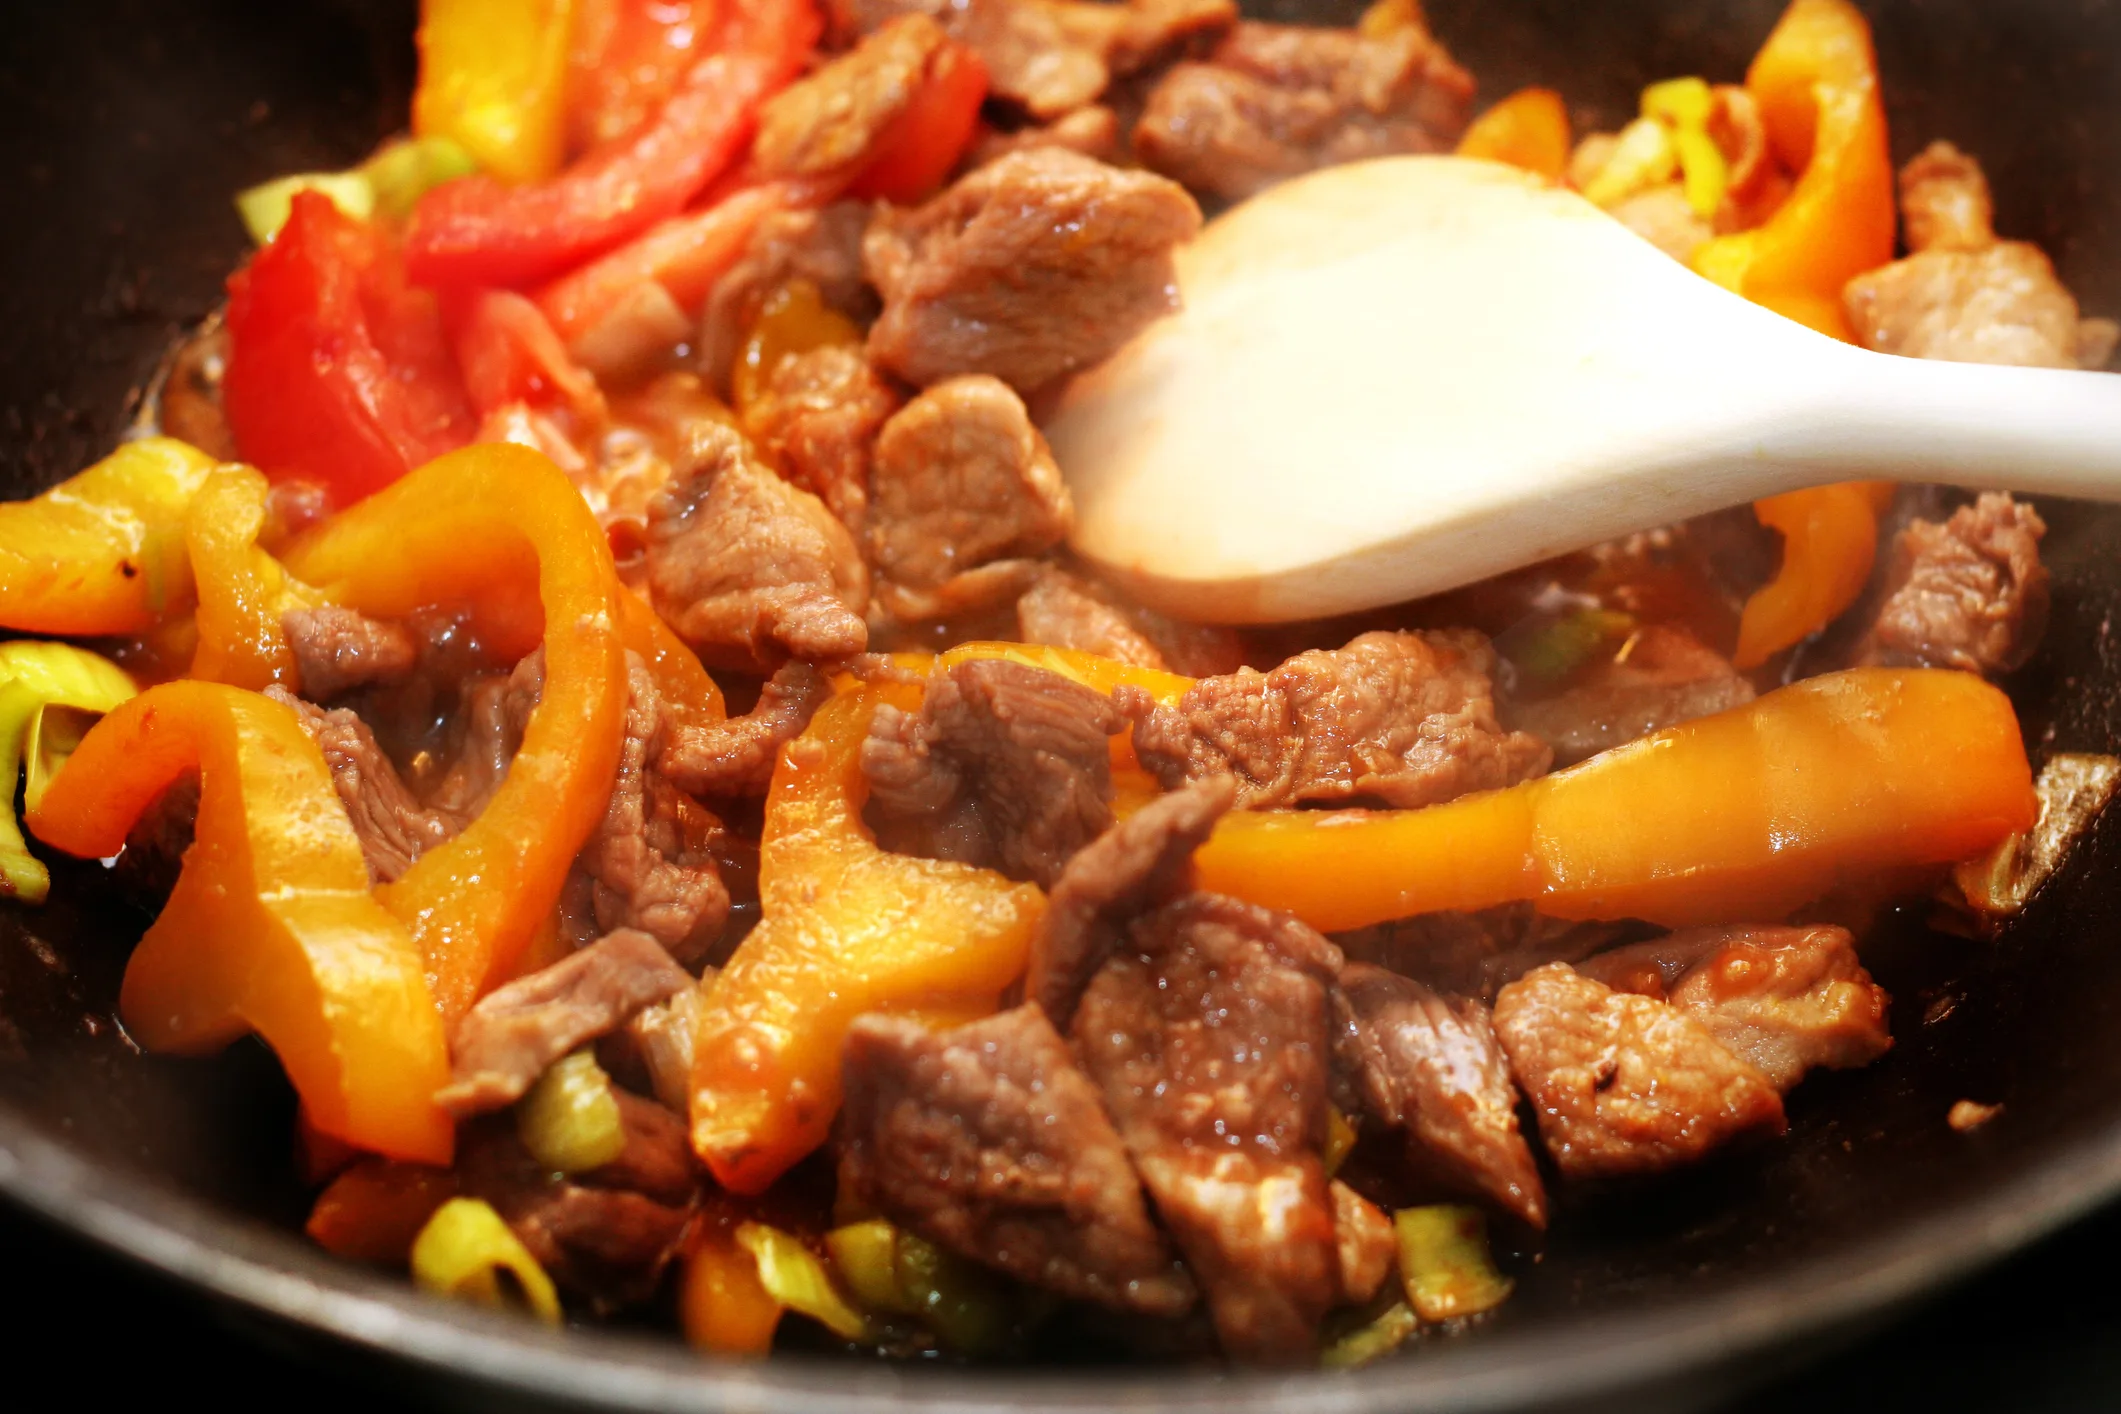 Stir Fried Beef and Nectarines